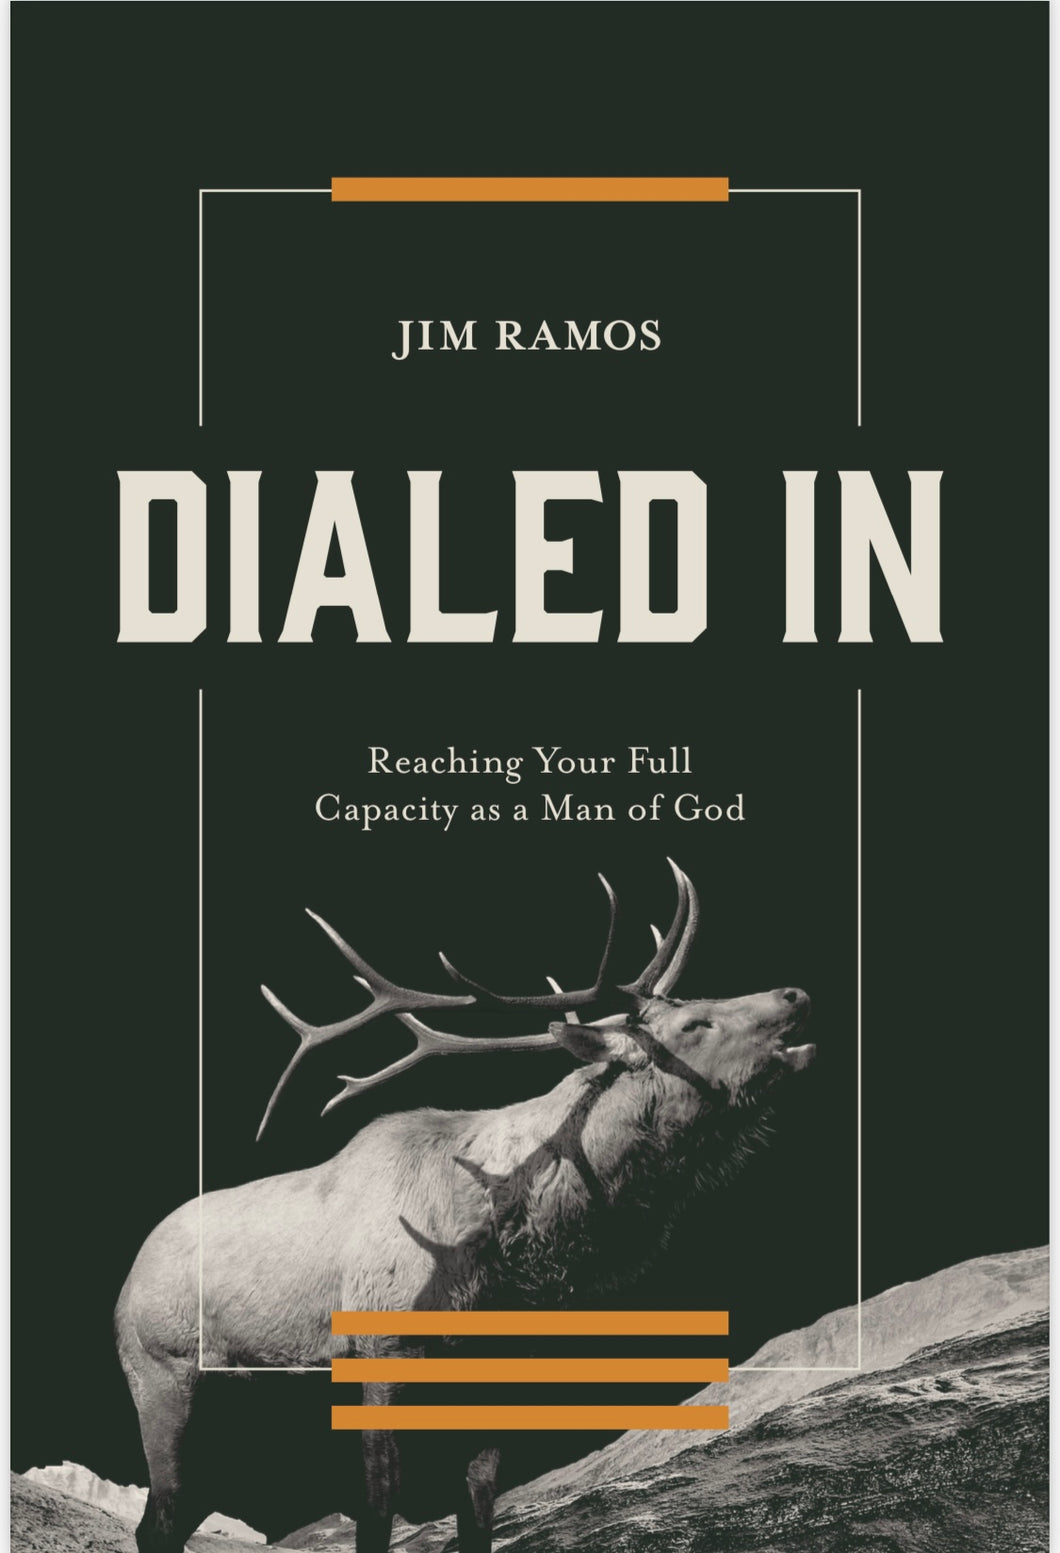 PRE-ORDER: Dialed In: Reaching Your Full Capacity as a Man of God by Jim Ramos